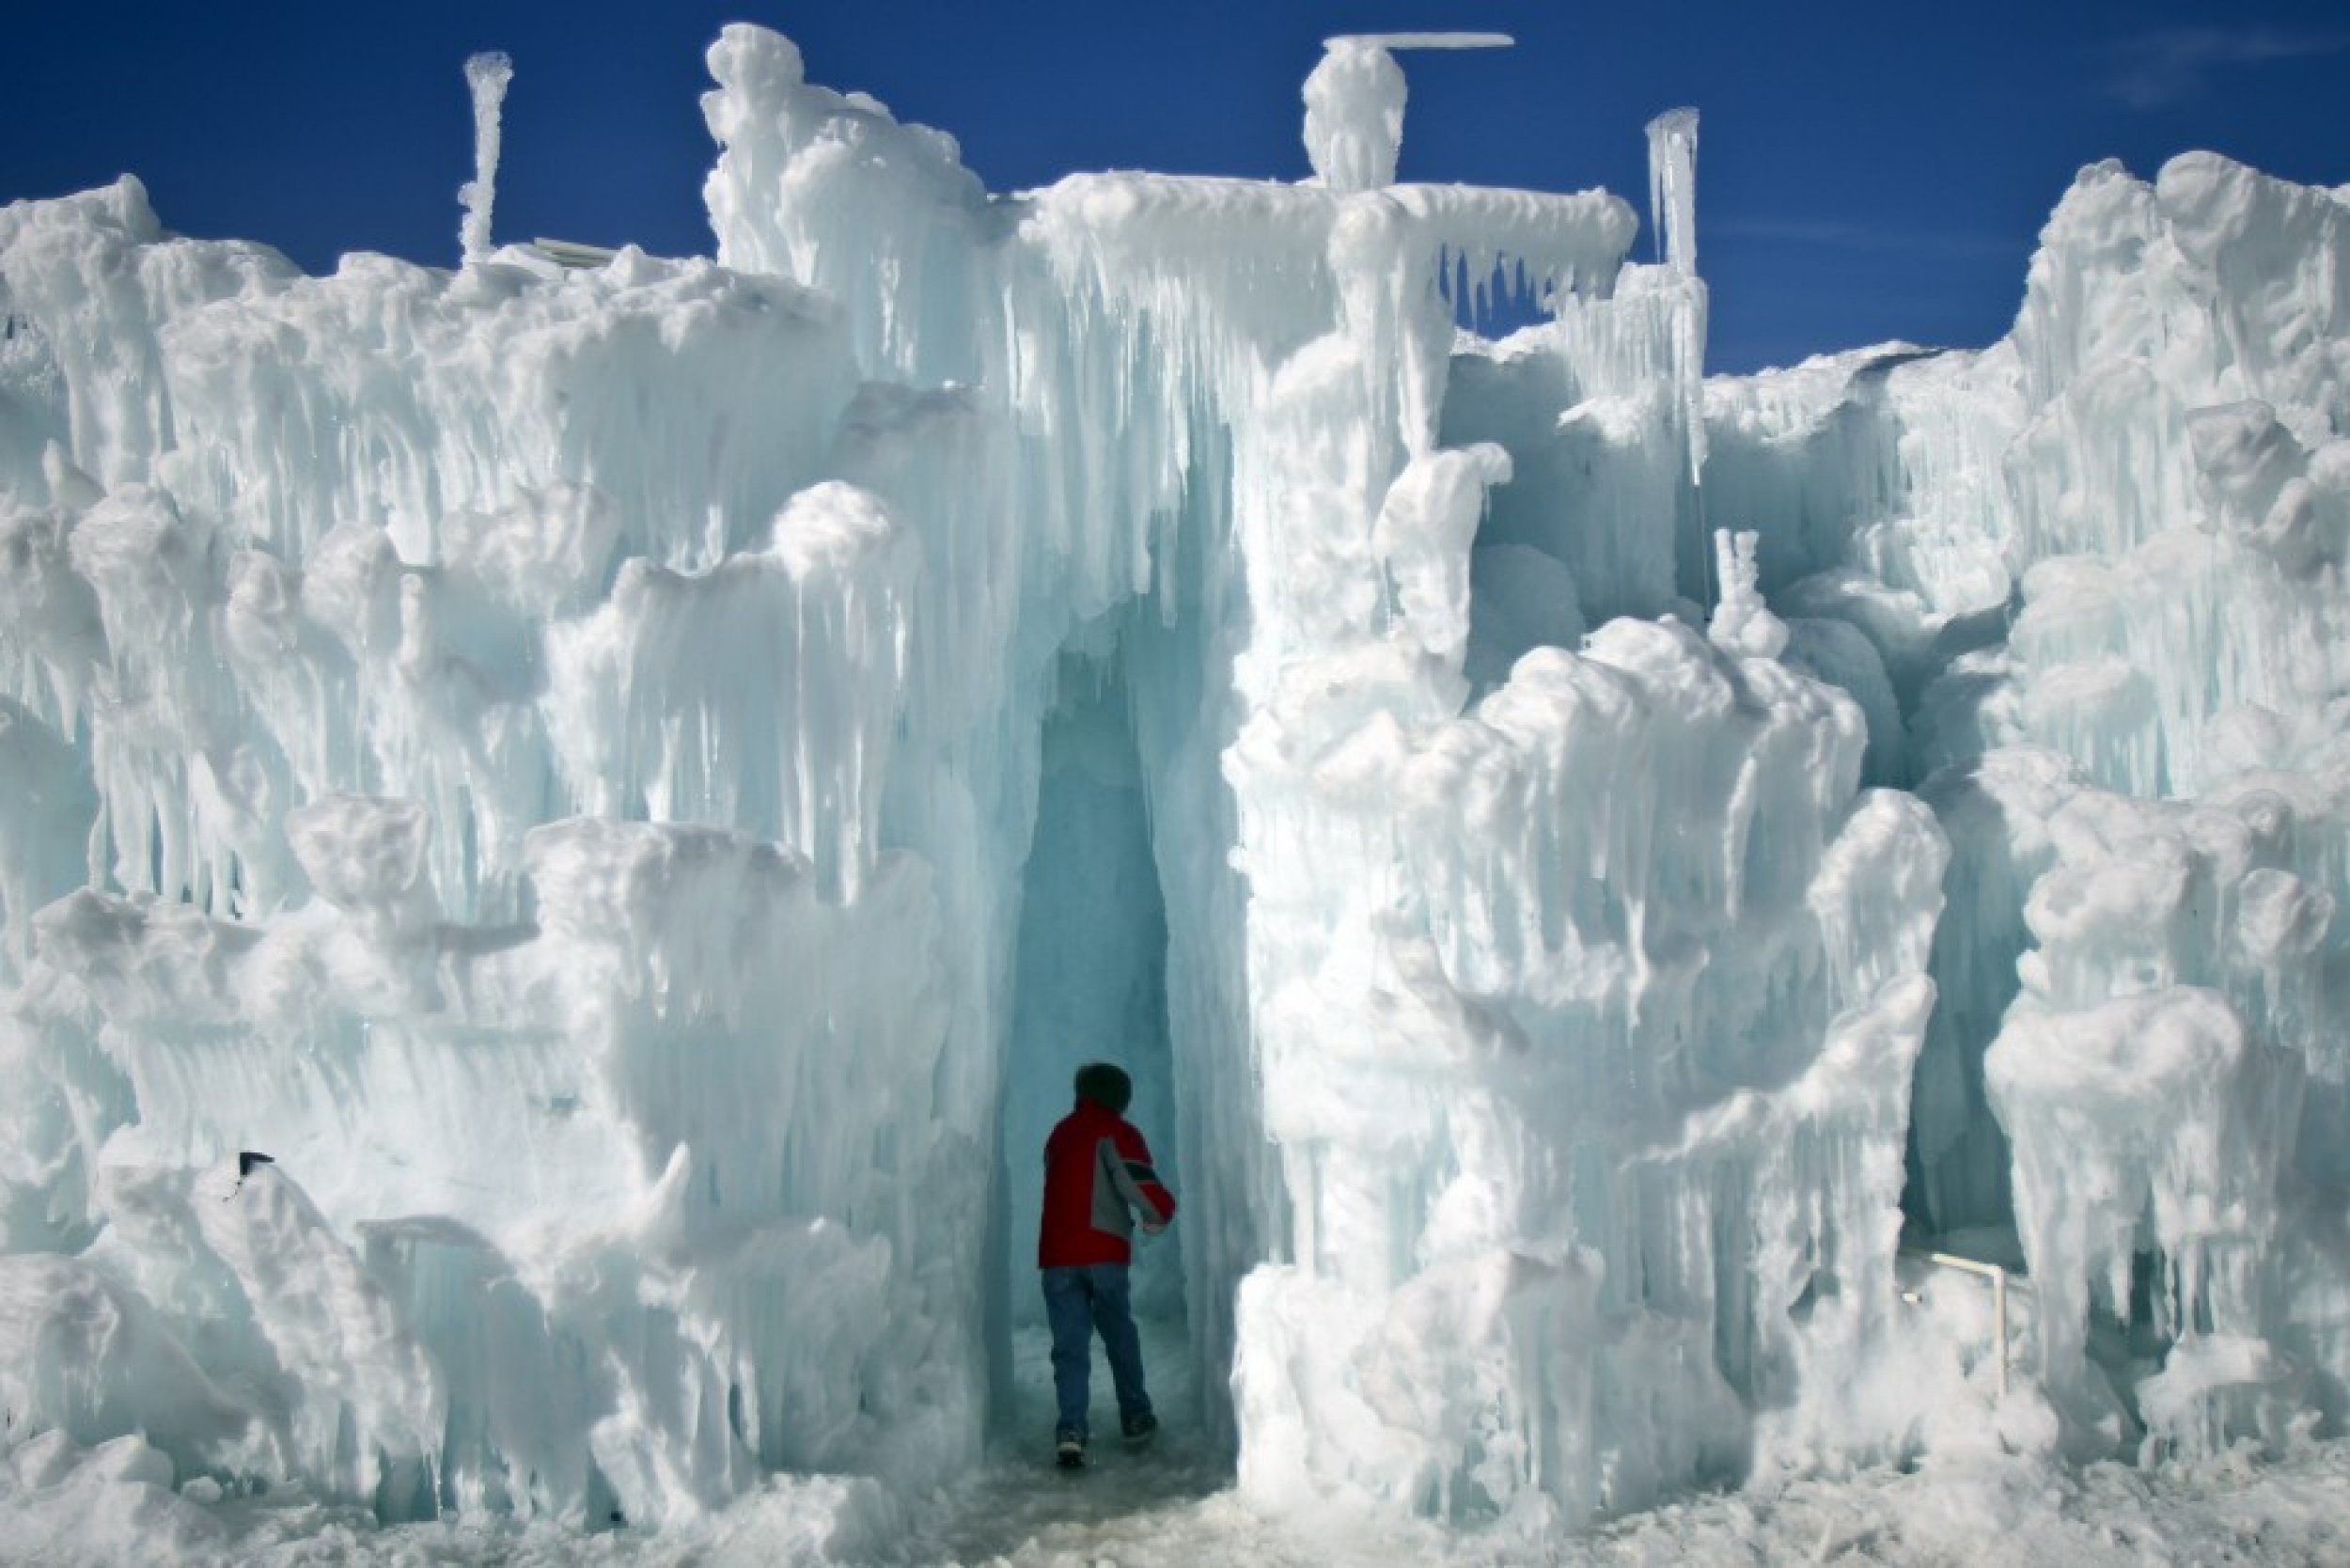 A boy runs though ice formations at the Ice Castles at Silverthorne in Colorado Jan. 3, 2012.  REUTERSNathan Armes